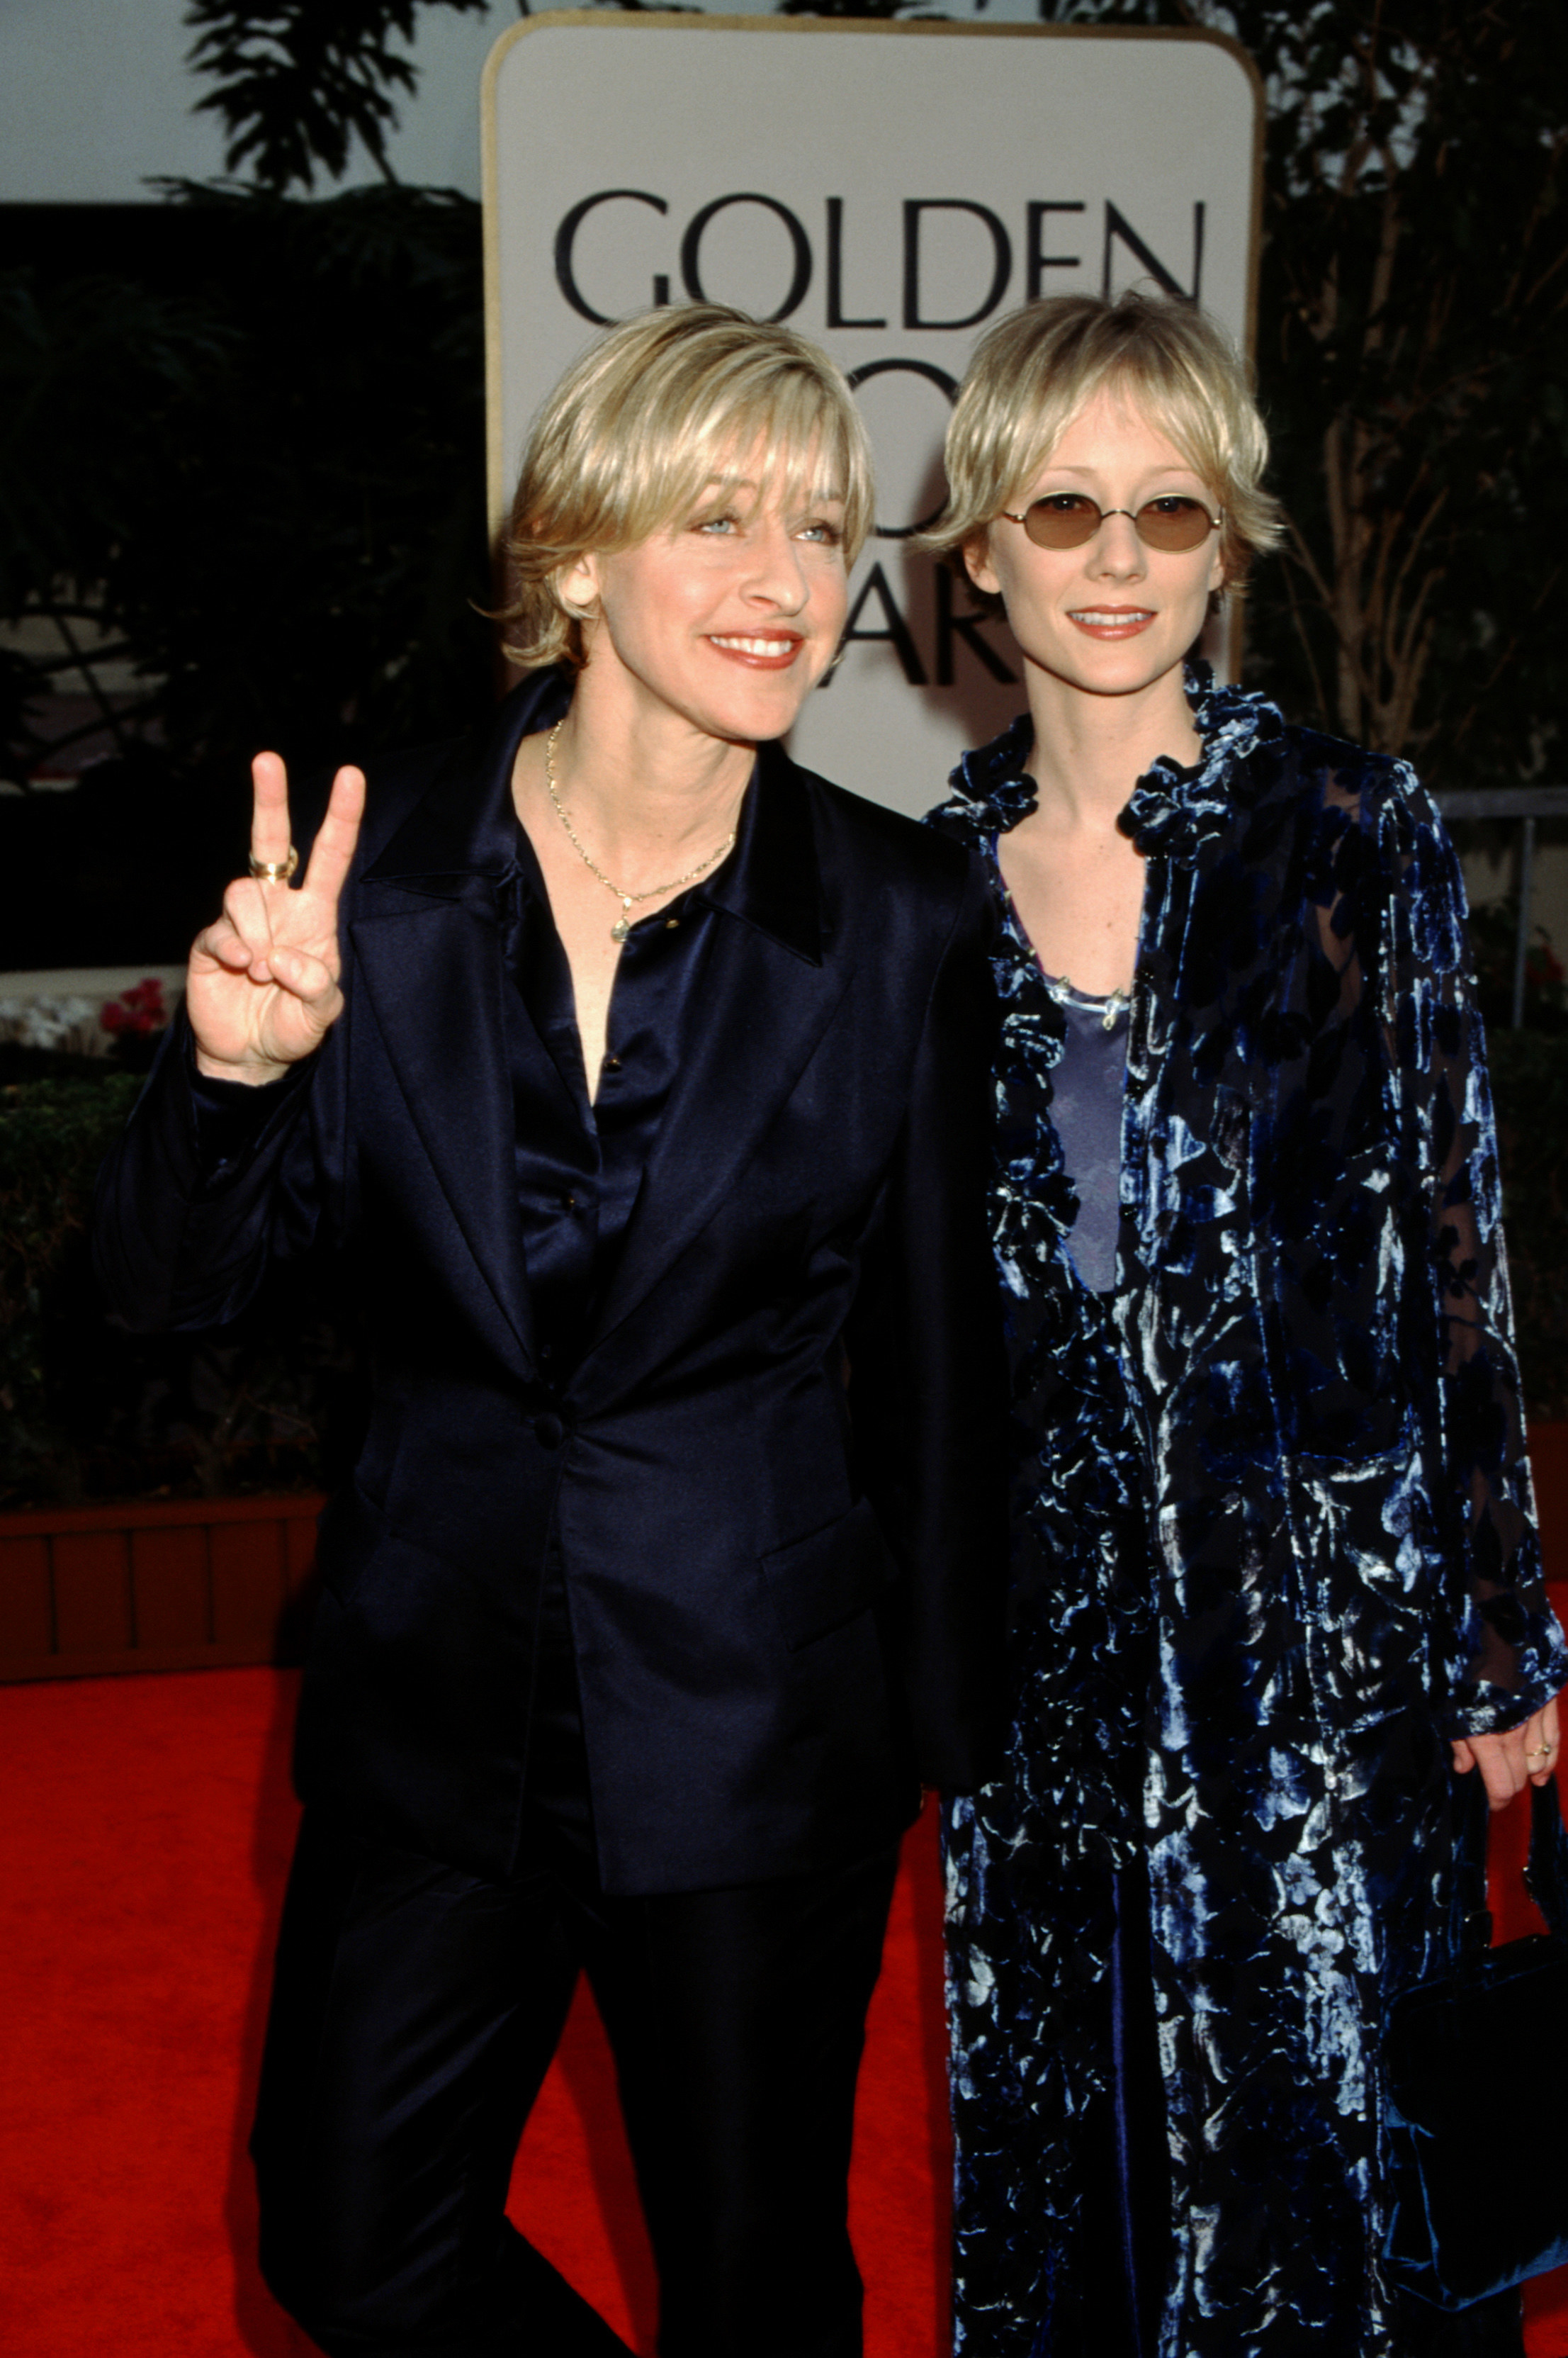 Ellen and Anne walking the Golden Globes red carpet as Ellen gives the peace sign